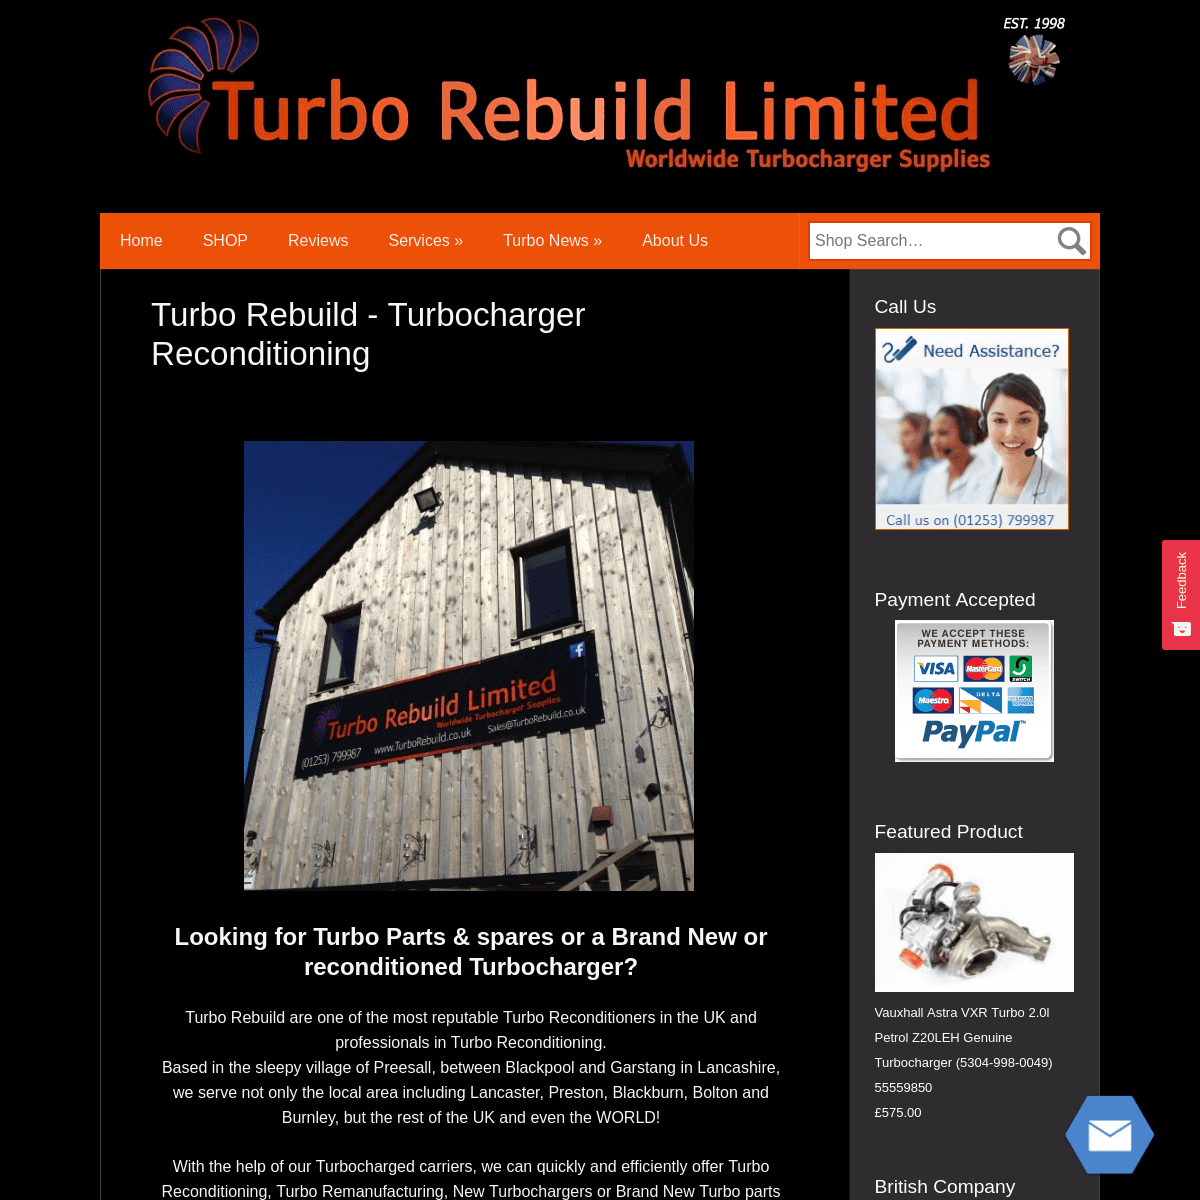 New & Reconditioned Turbochargers & Turbo Parts